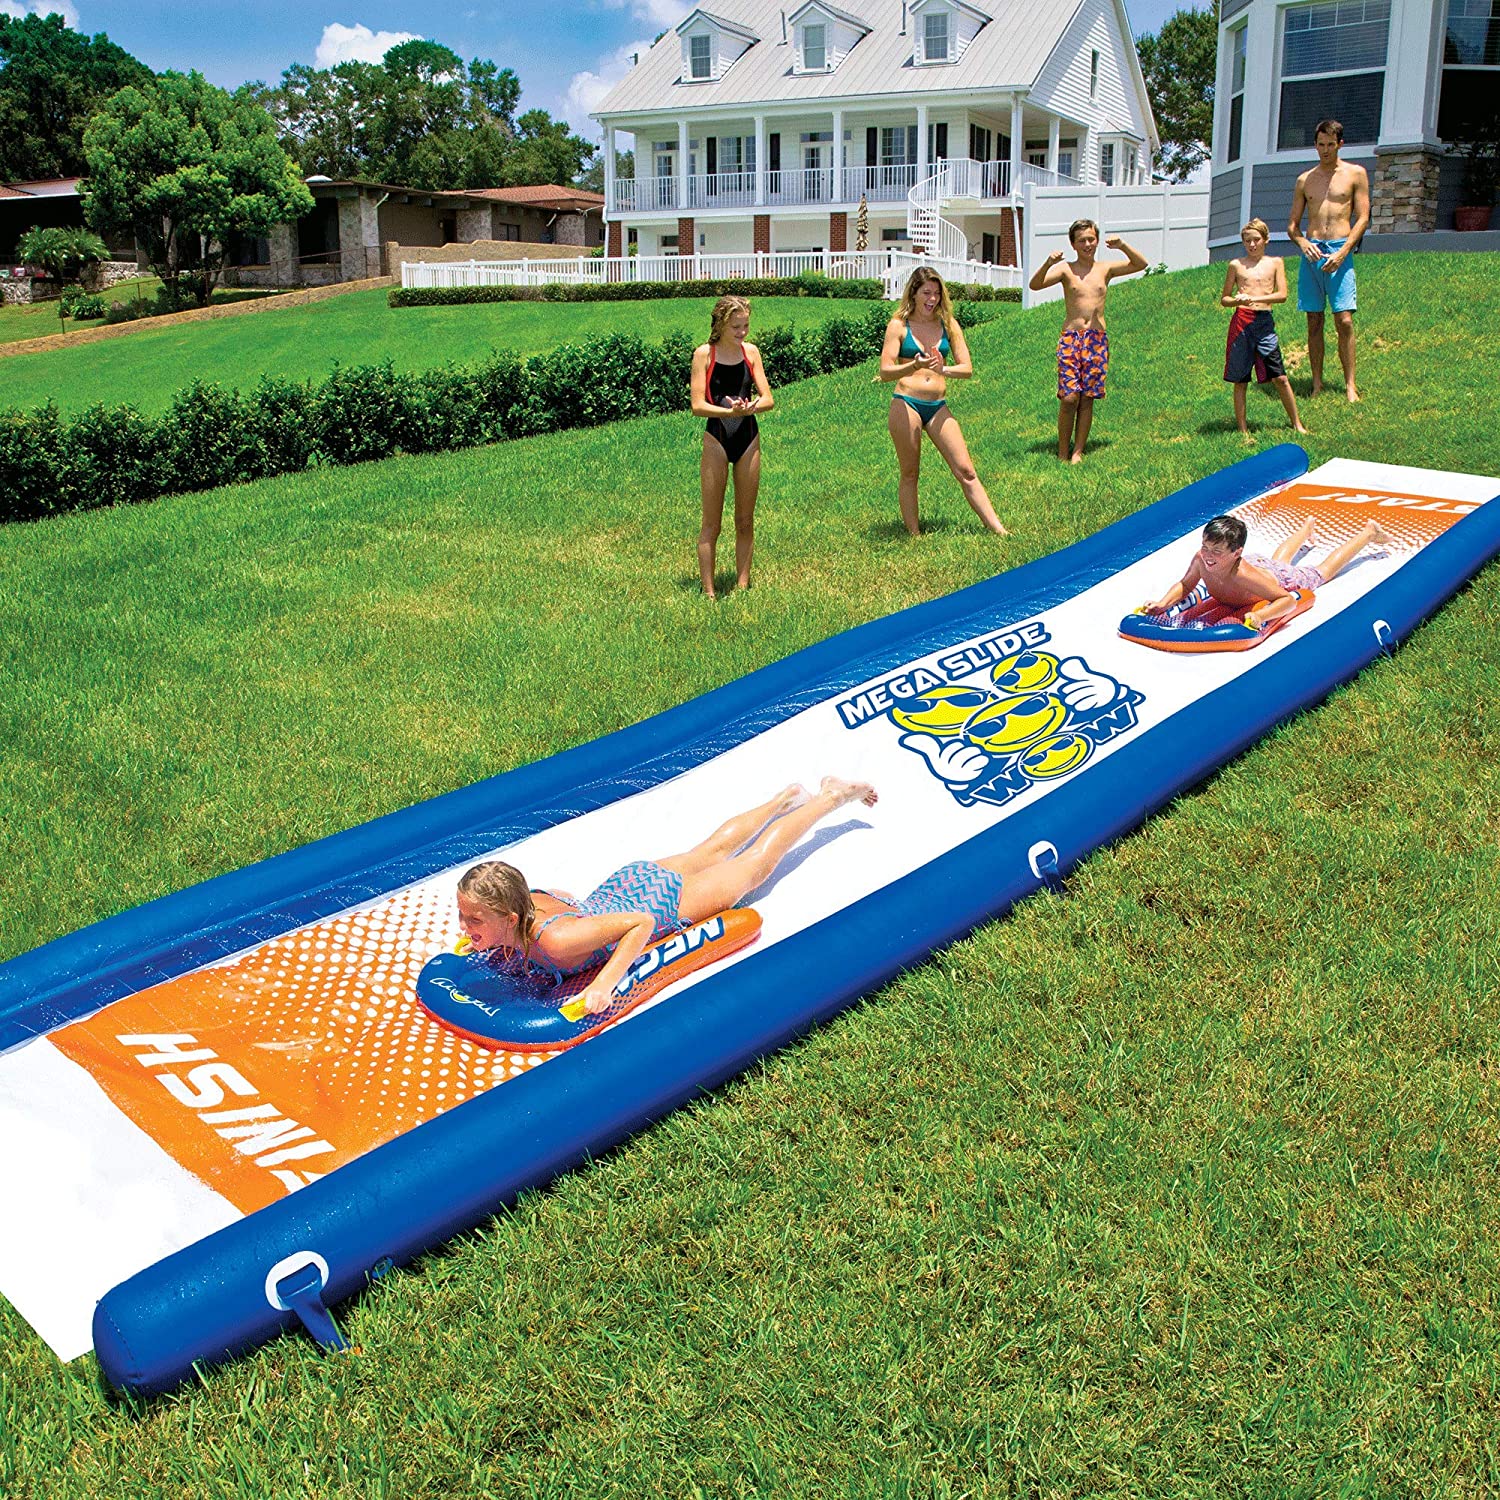 10 Best Slip and Slide for Kids of 2022 Reviews and Buying Guides